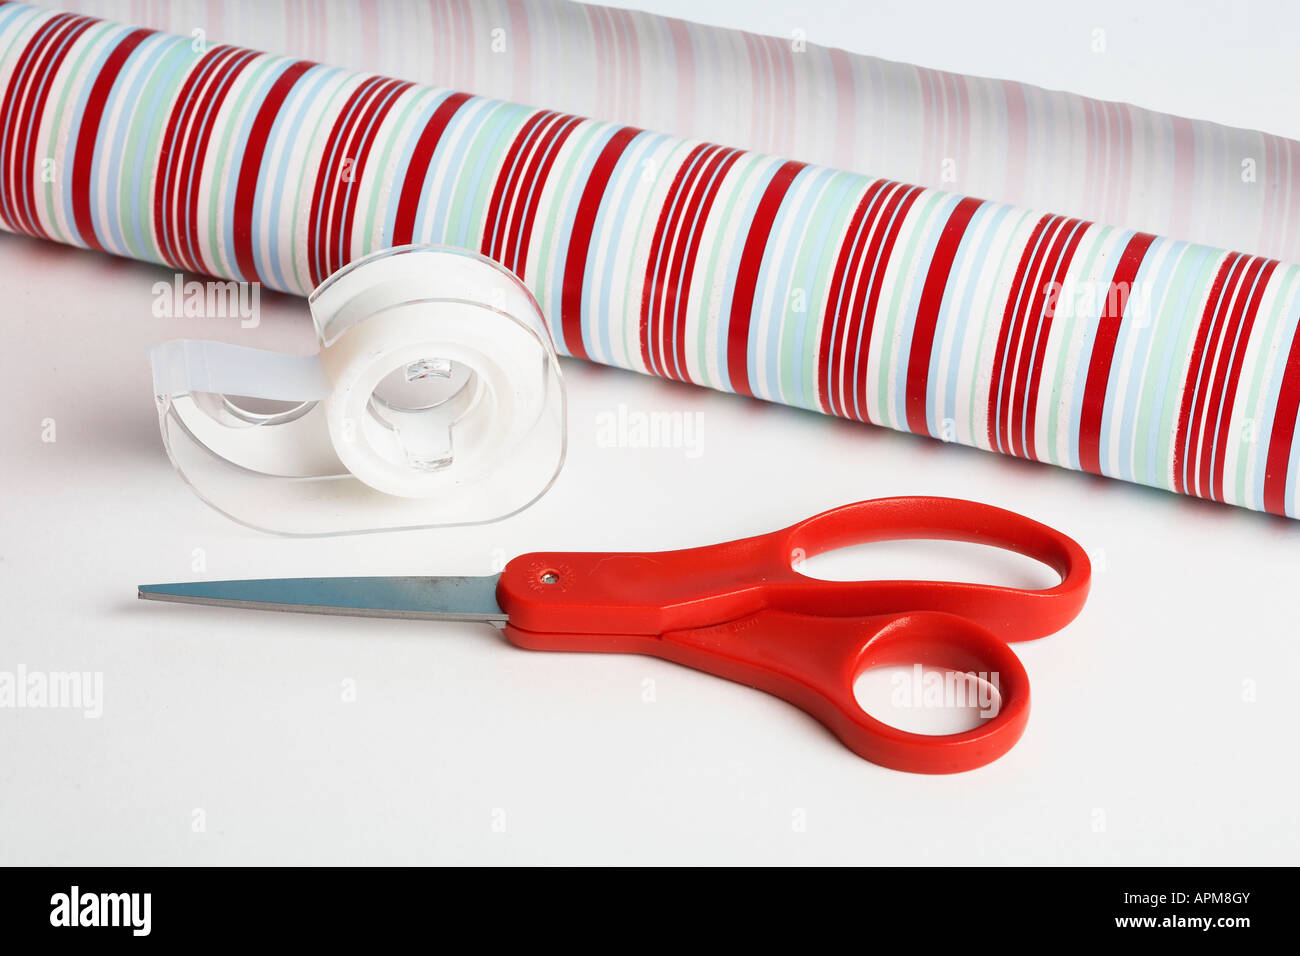 https://c8.alamy.com/comp/APM8GY/wrapping-paper-adhesive-tape-and-scissors-APM8GY.jpg